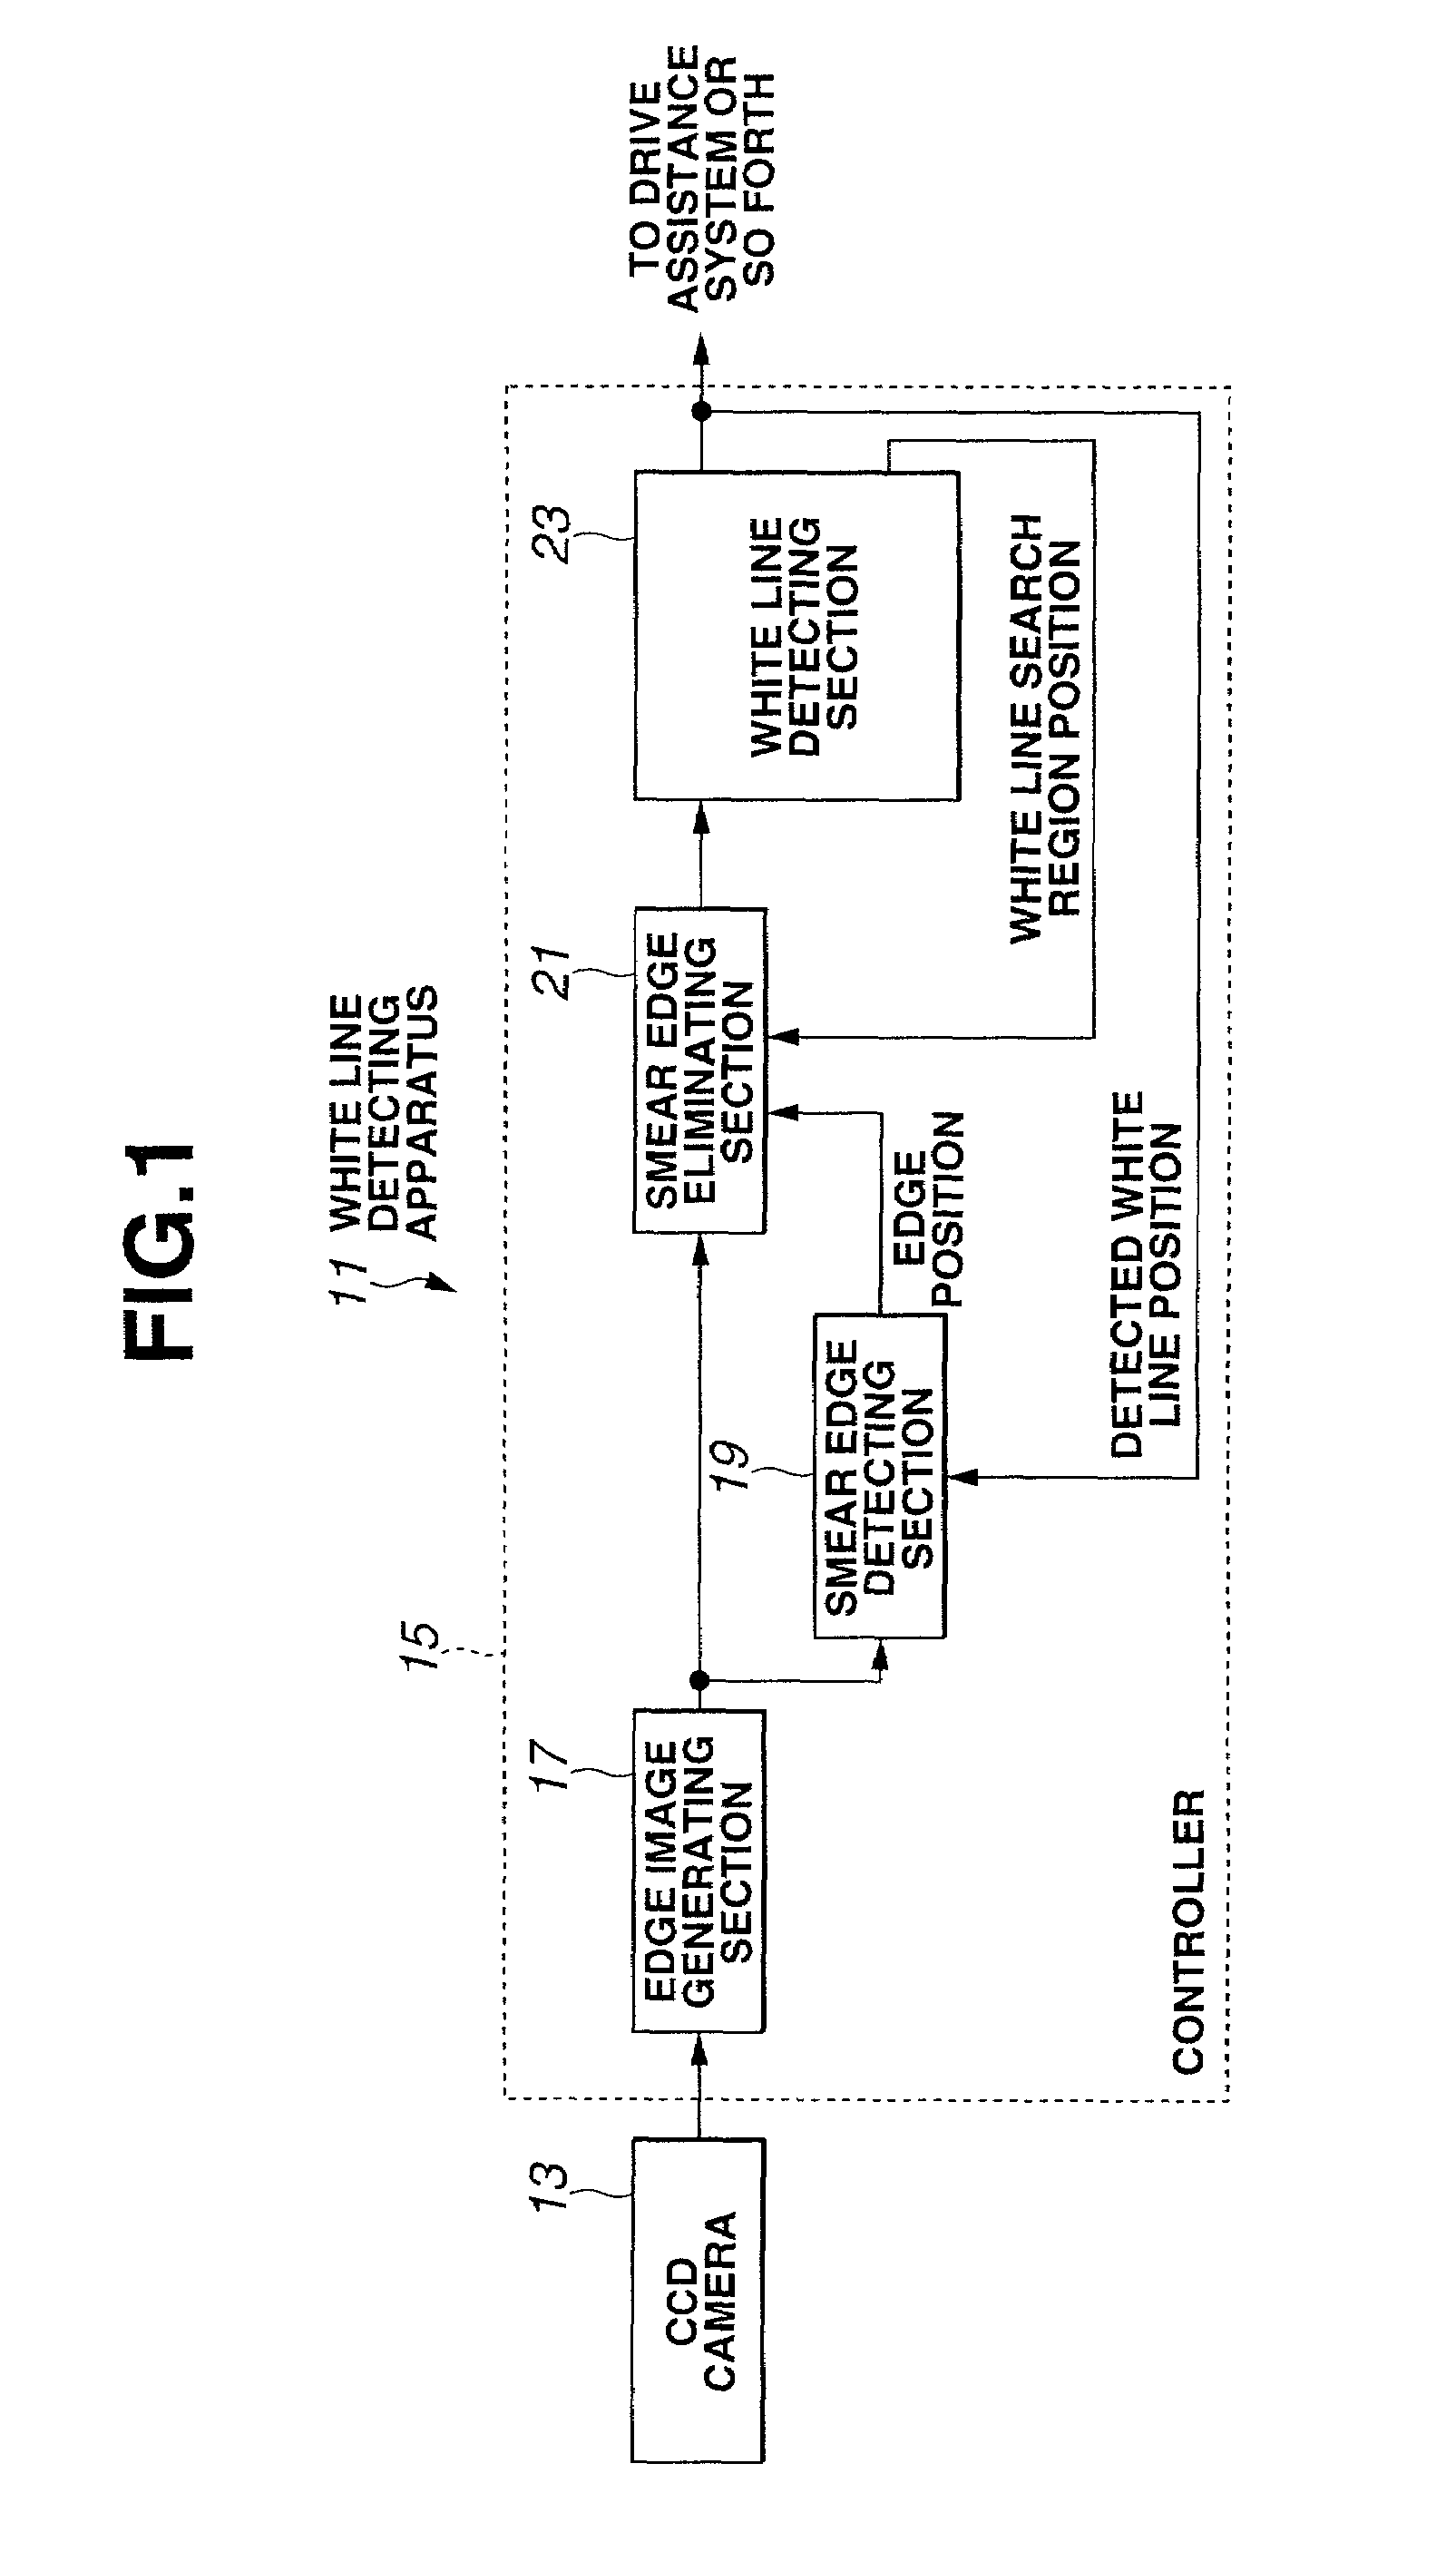 Apparatus and method for detecting road white line for automotive vehicle